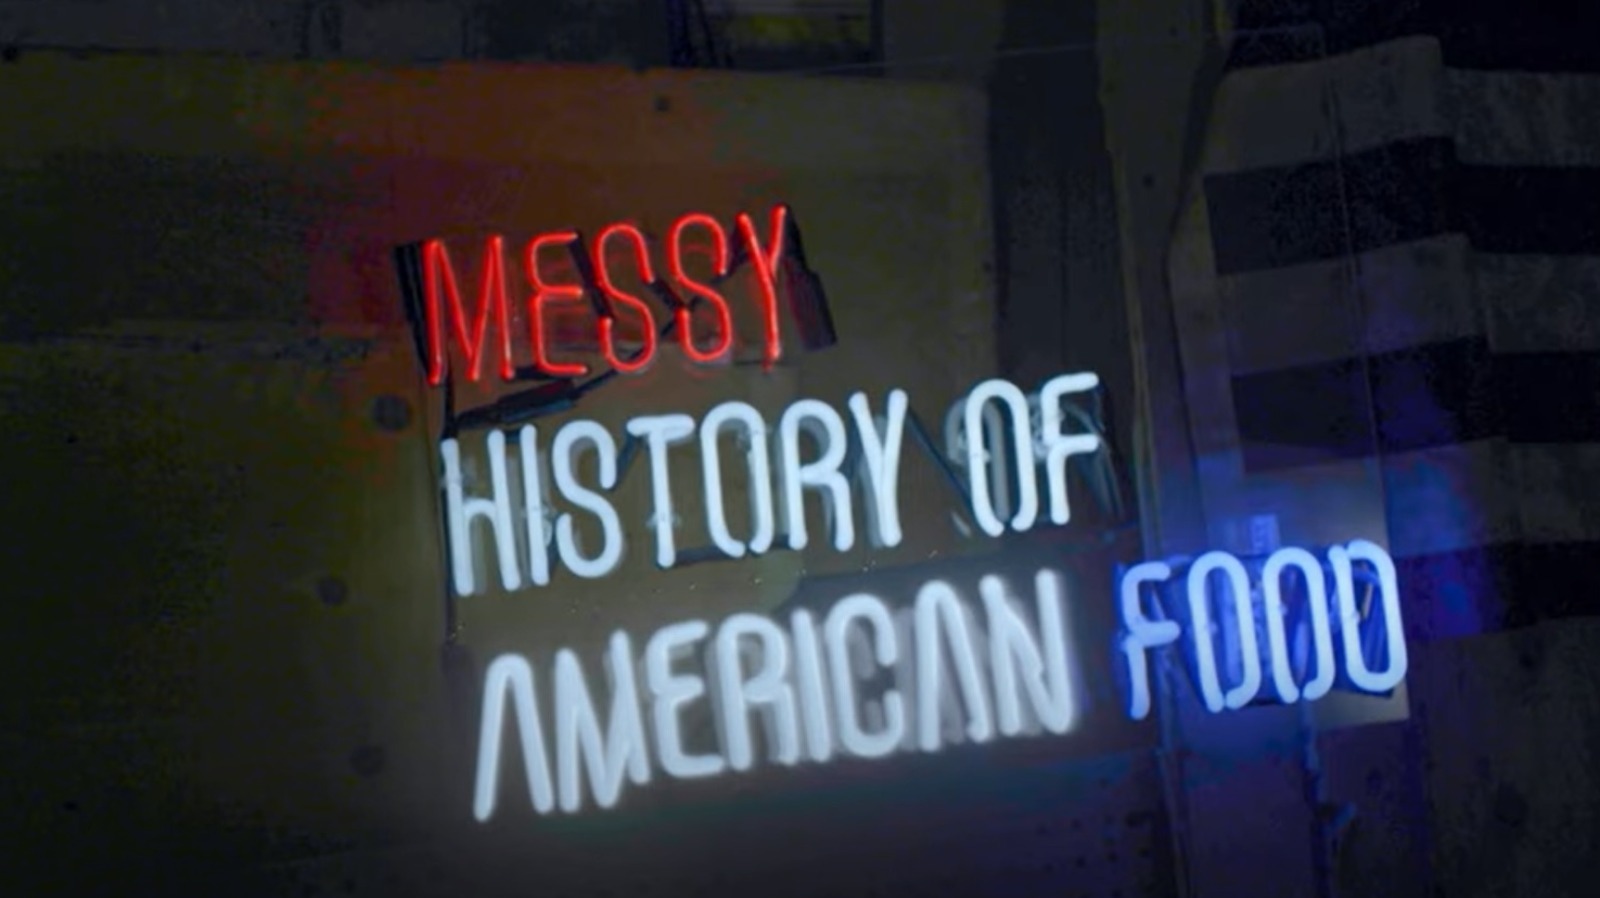 American Food: A Not-So-Serious History